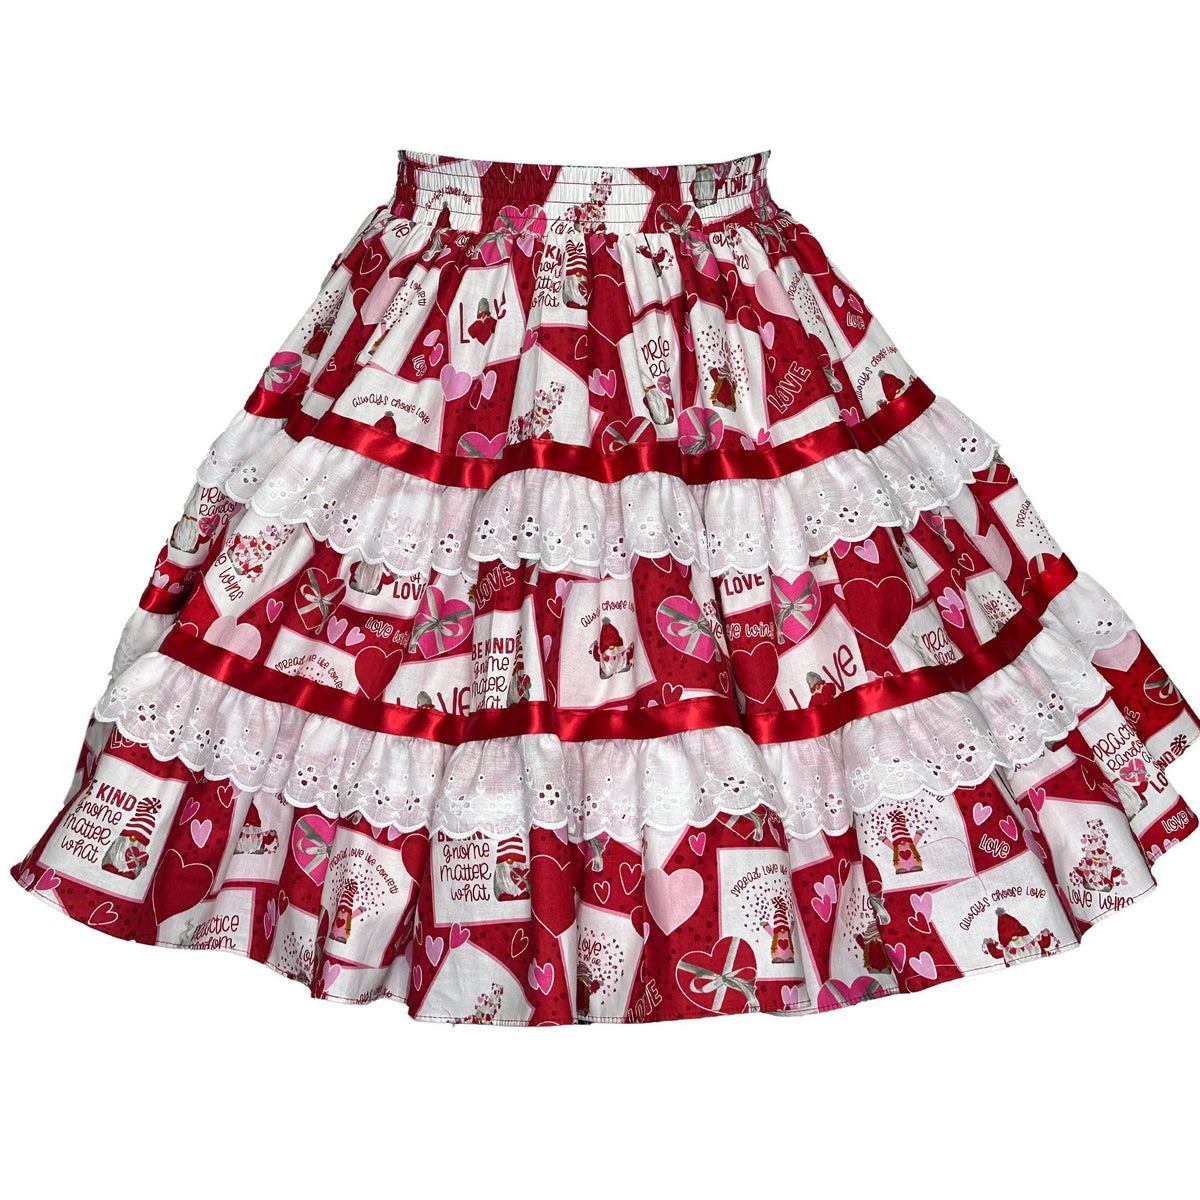 A Whimsical Valentine&#39;s Day Skirt by Square Up Fashions, with hearts on it.